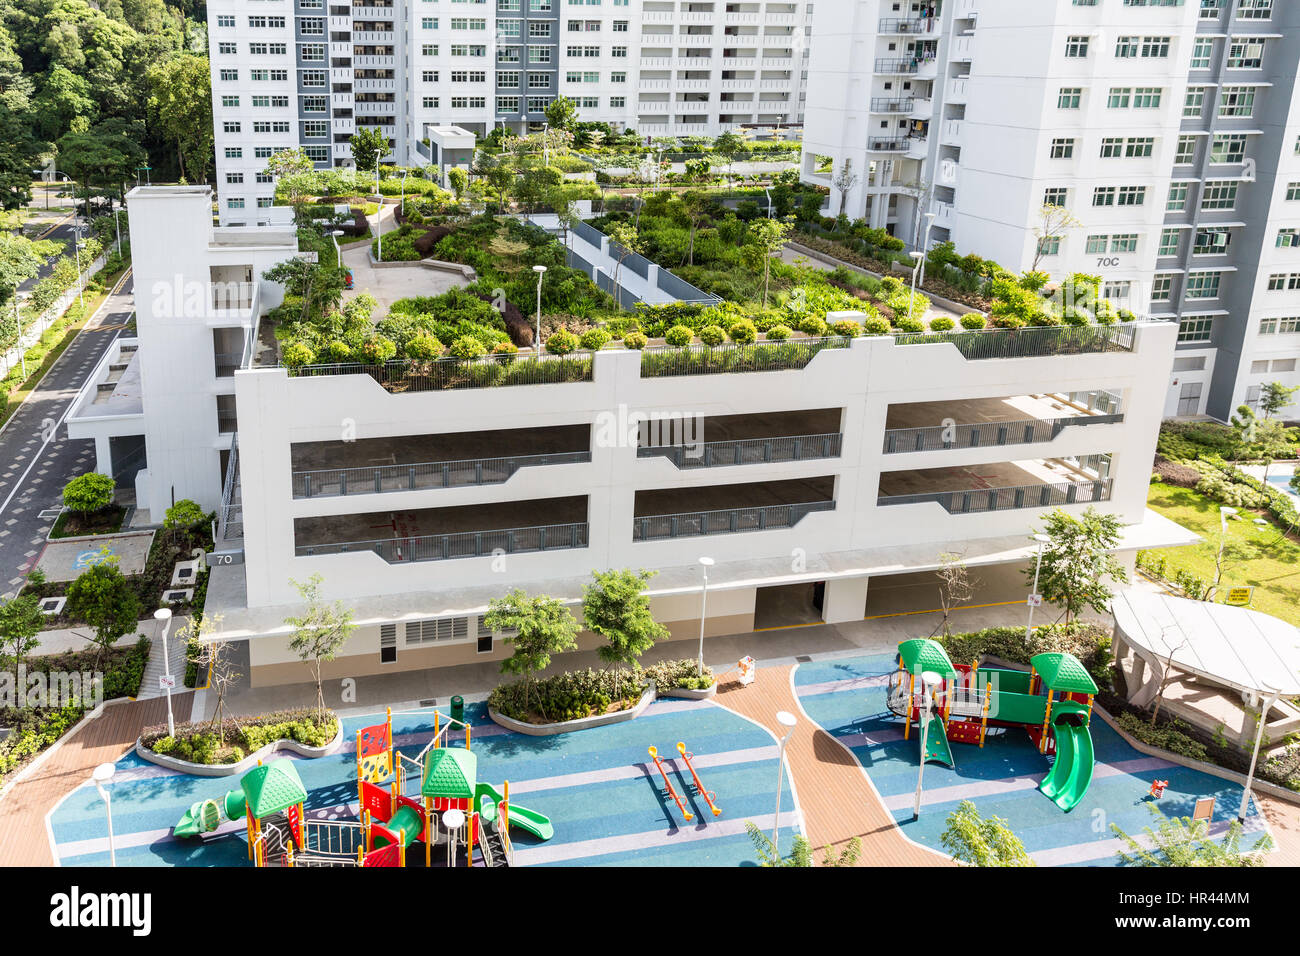 Rooftop Gardens Feature In New Public Hdp Apartments In Singapore